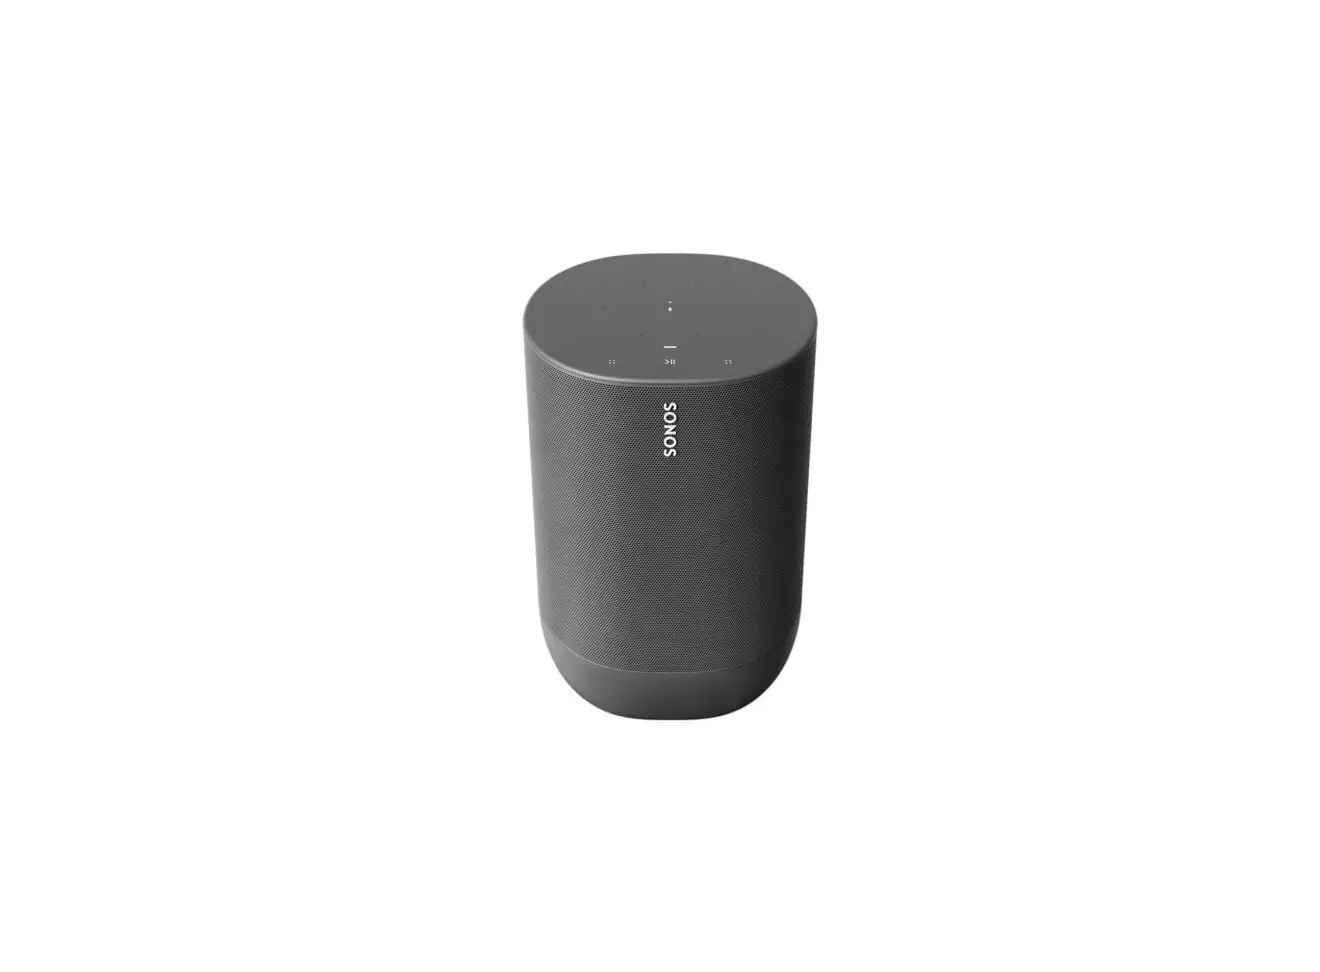 MOVE Portable WiFi and Bluetooth Speaker